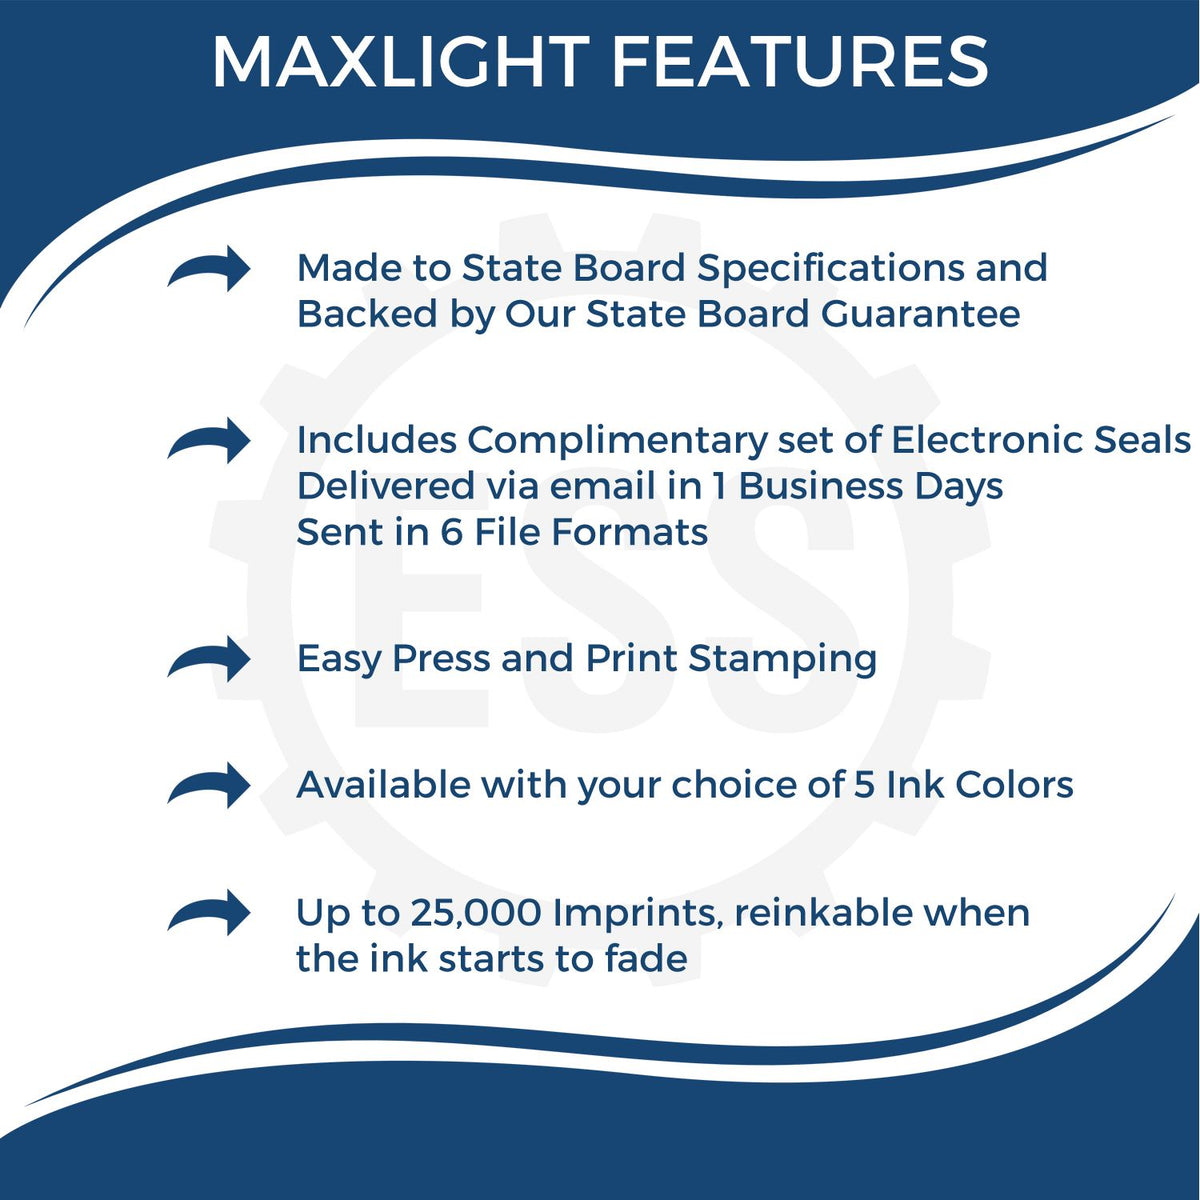 A picture of an infographic highlighting the selling points for the MaxLight Premium Pre-Inked Arkansas Rectangular Notarial Stamp